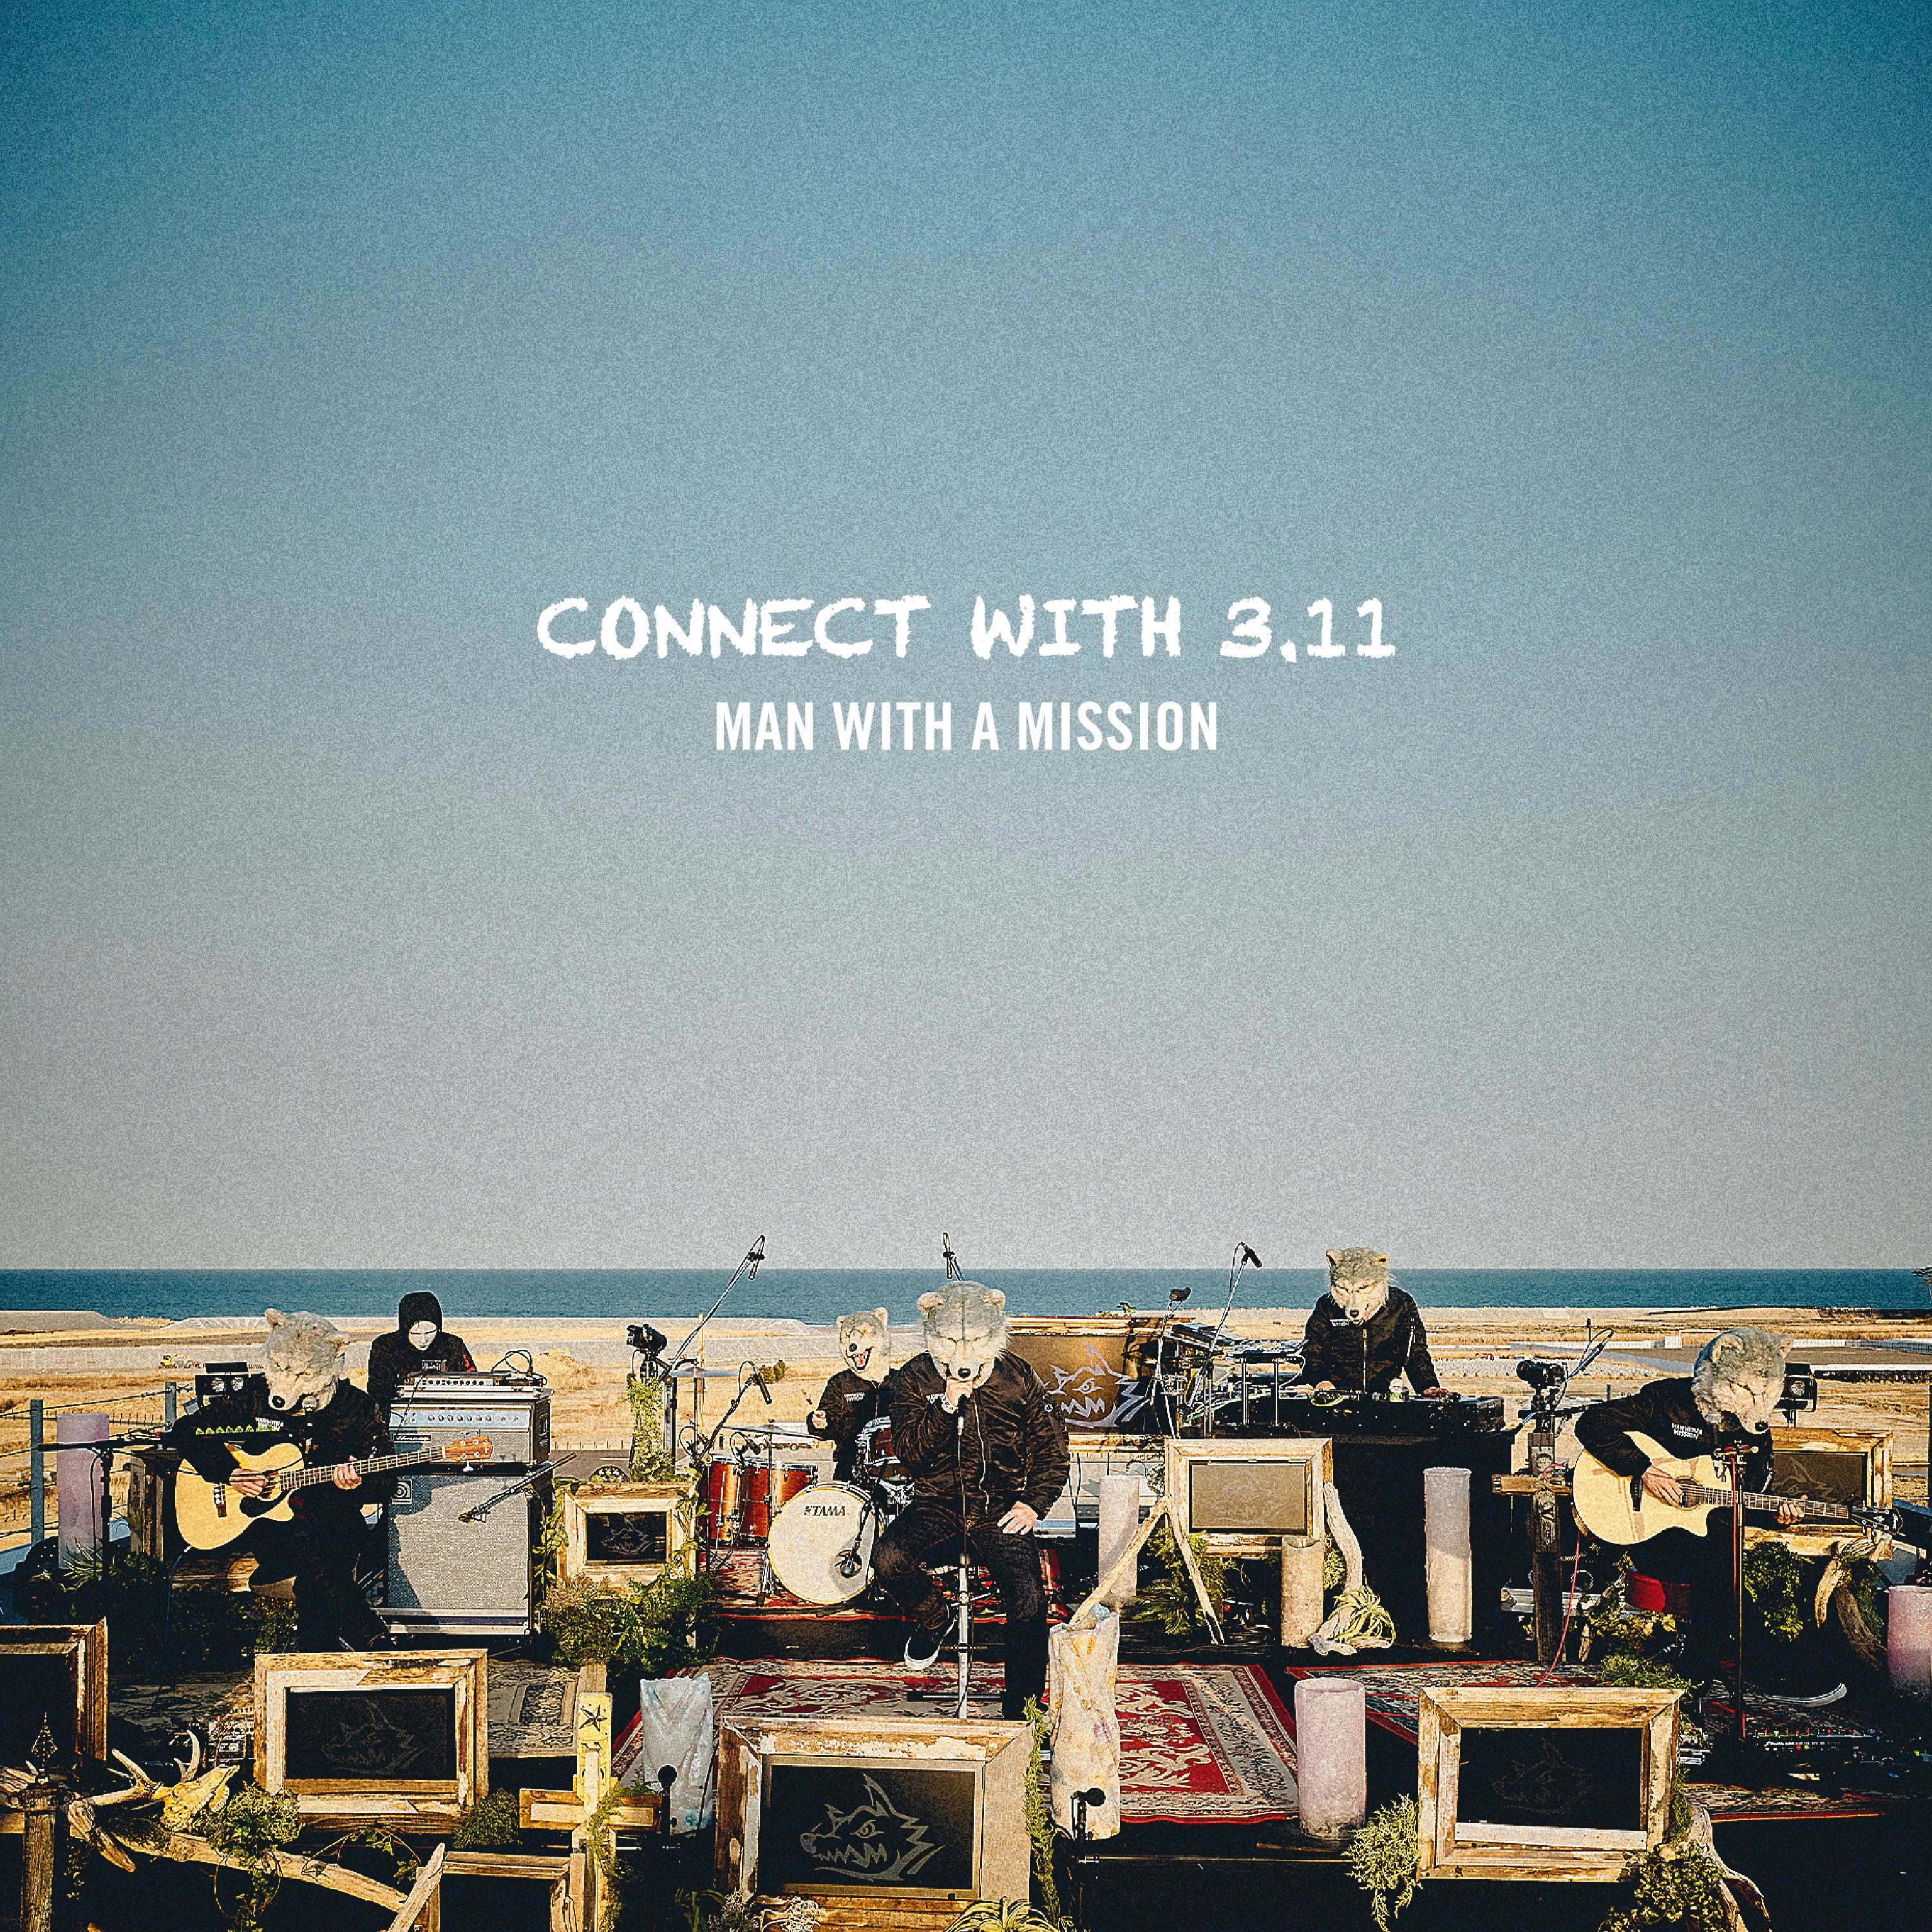 [Album] MAN WITH A MISSION – CONNECT WITH 3.11 (LIVE) [FLAC / WEB] [2021.10.27]